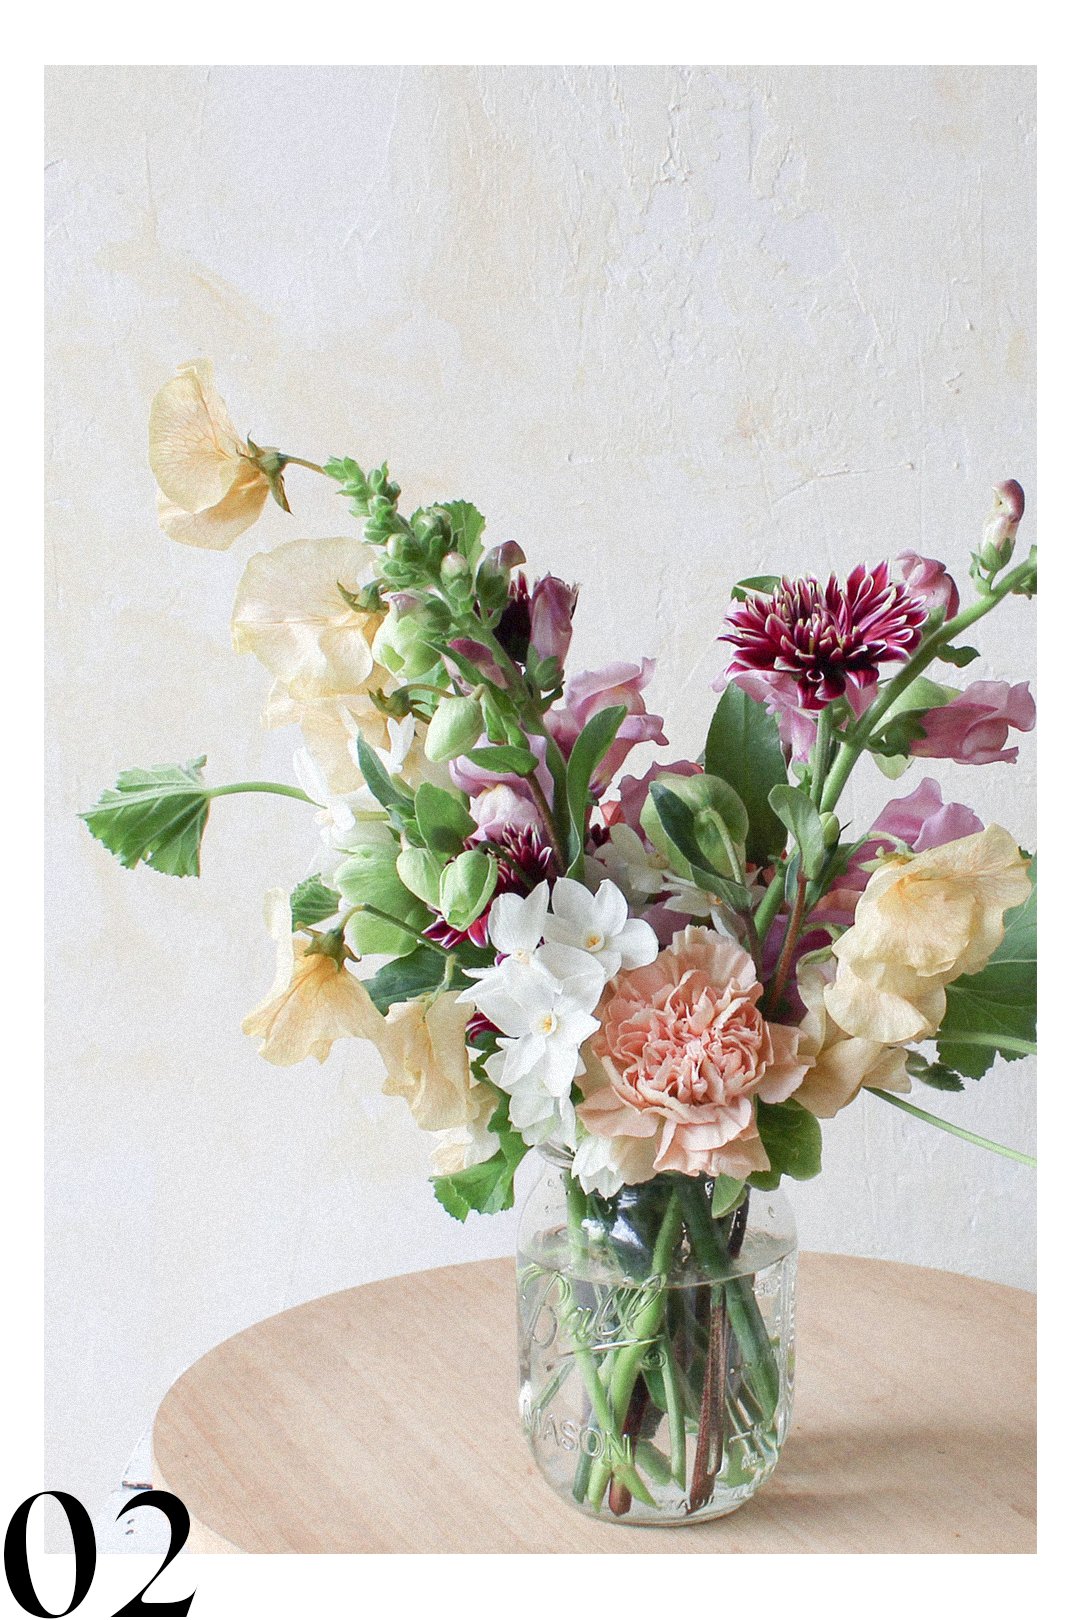 Sustainable_Bouquets_US_02.jpg